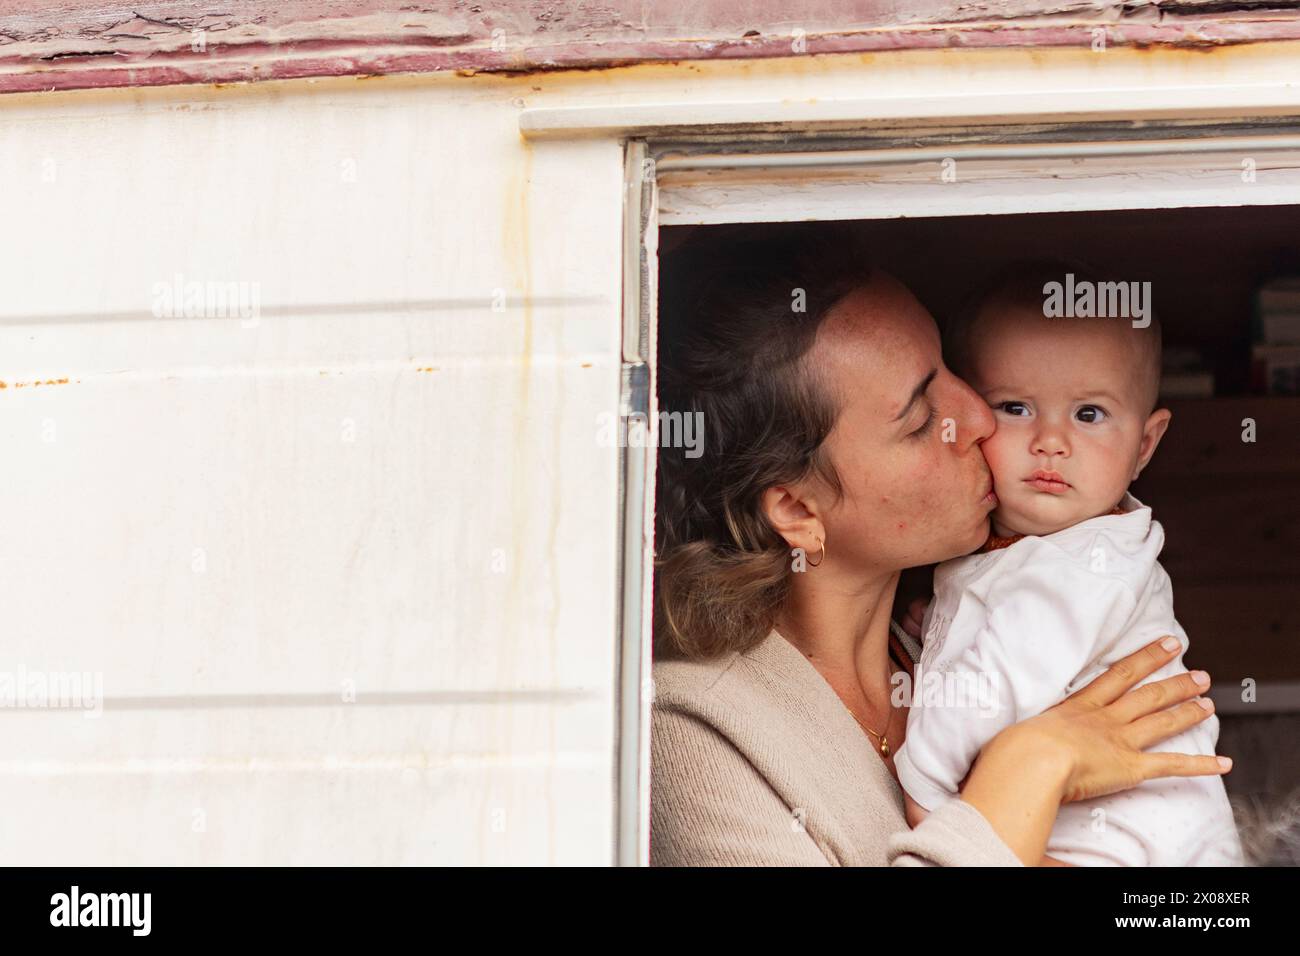 Side view of an intimate scene of a mother cherishing her baby at the doorway of their home on wheels. Stock Photo